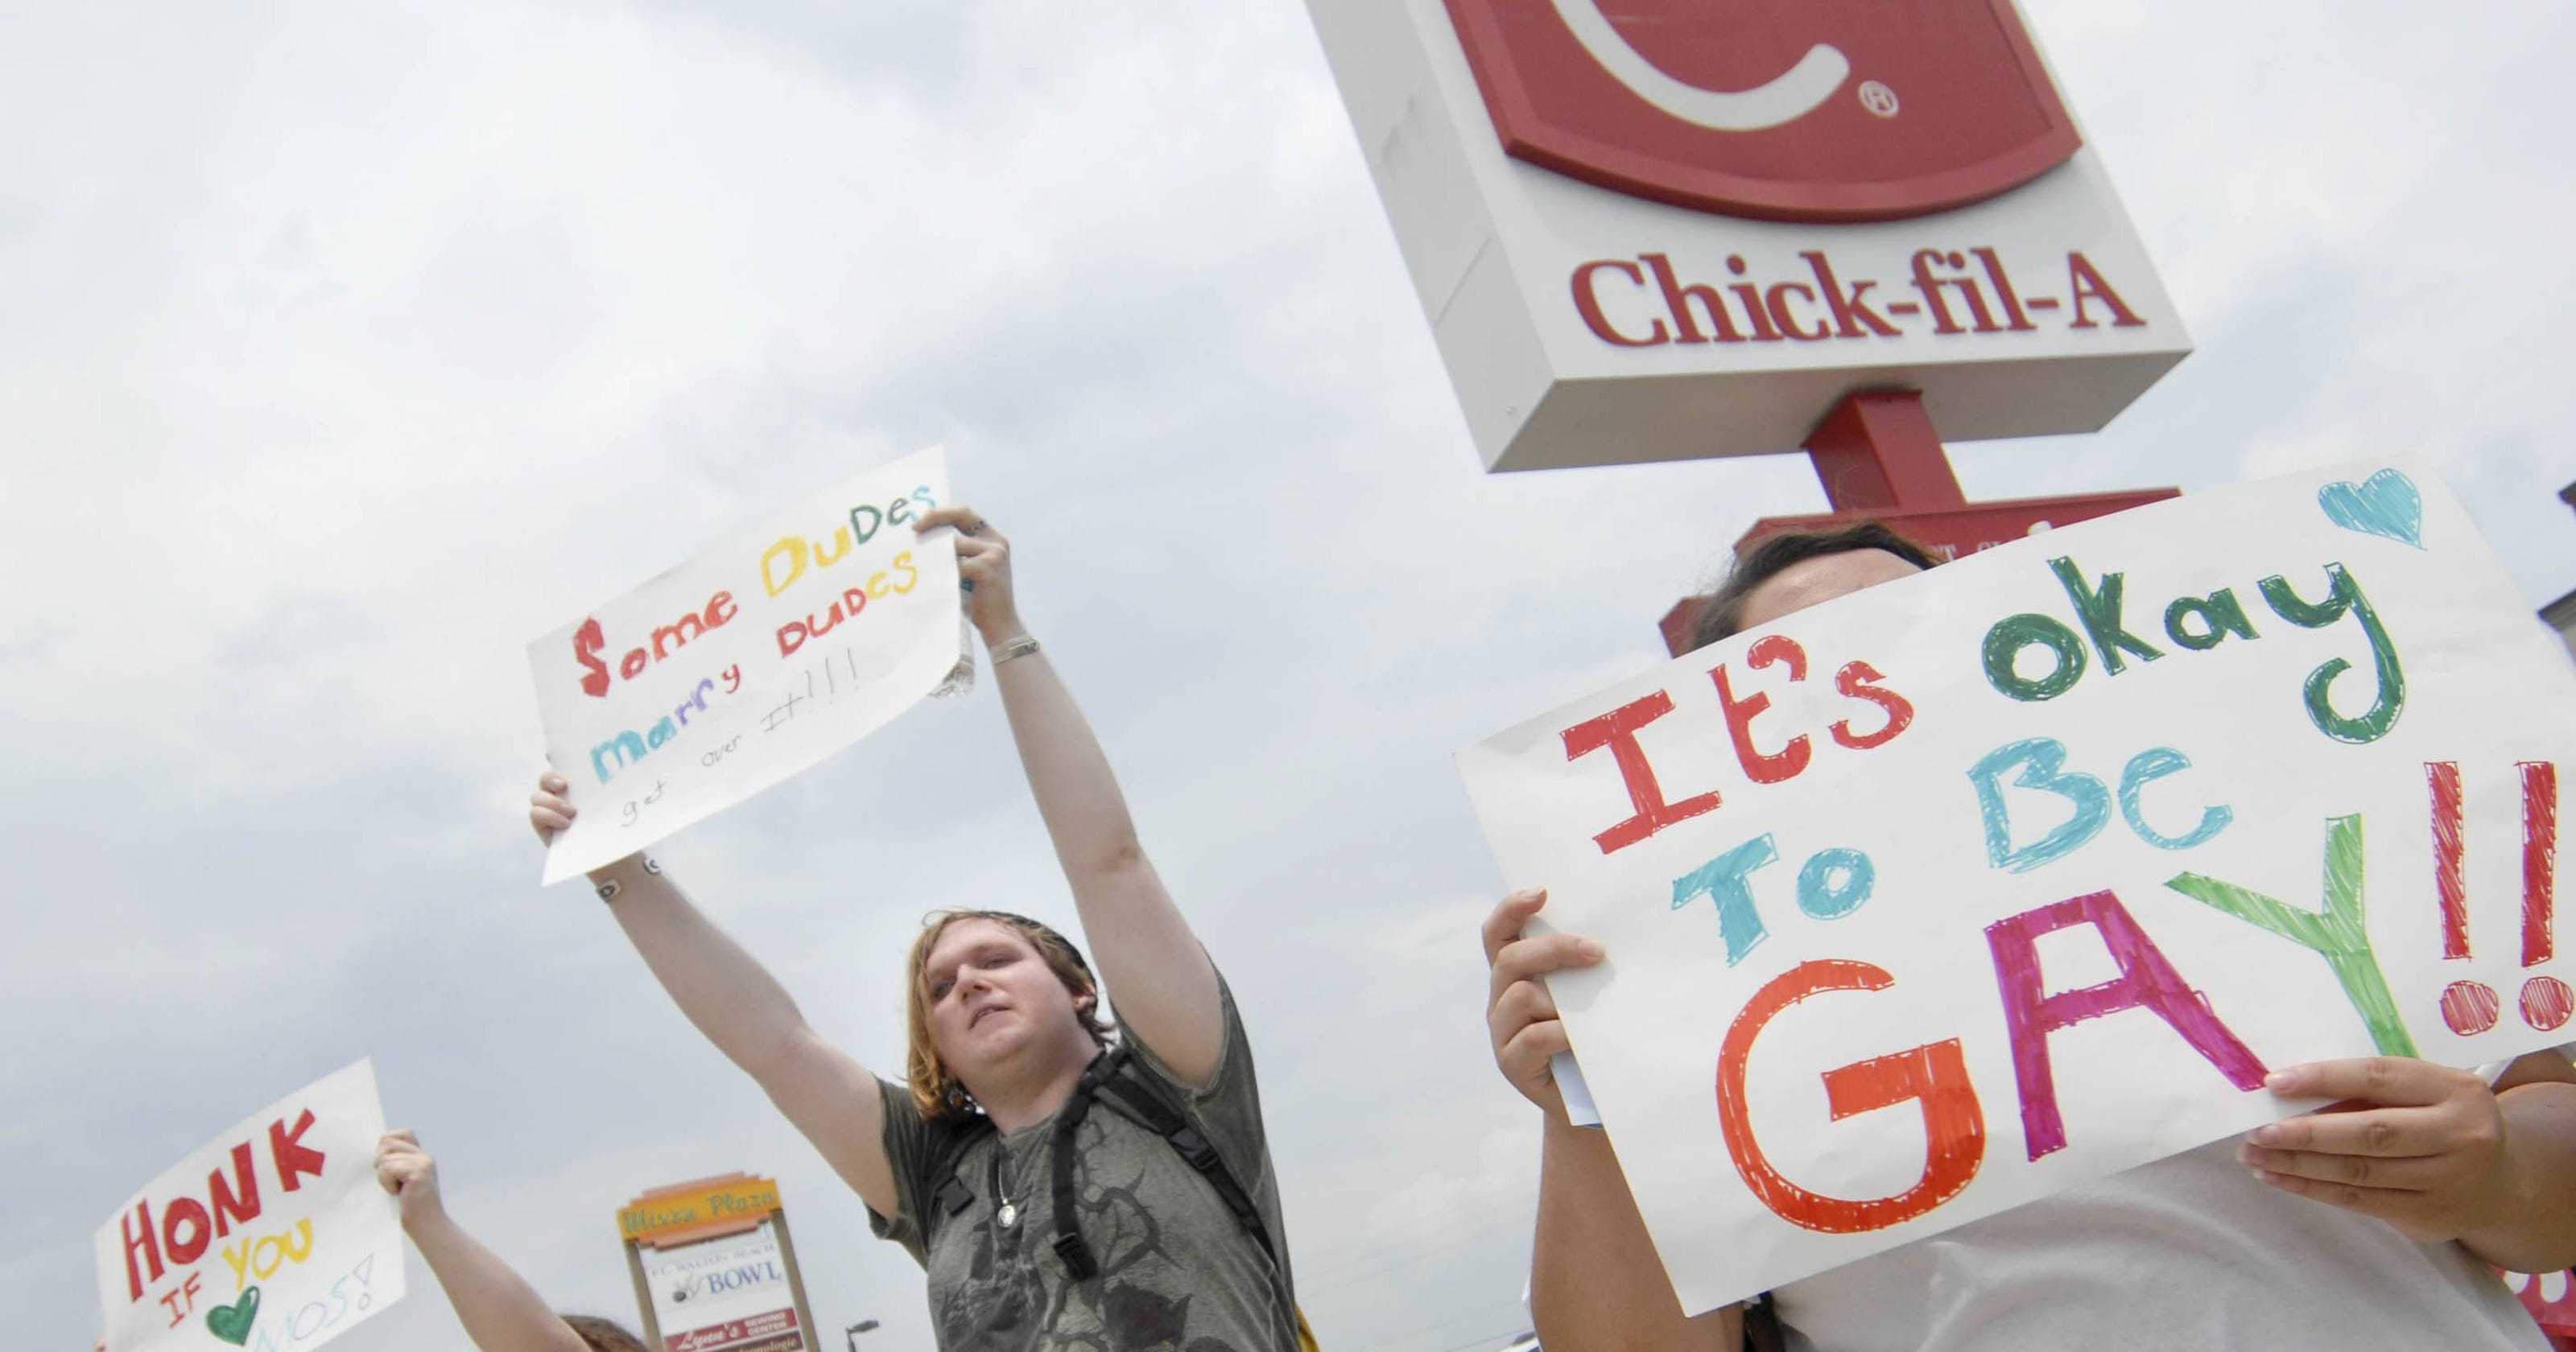 Reports ChickfilA to stop funding antigay groups